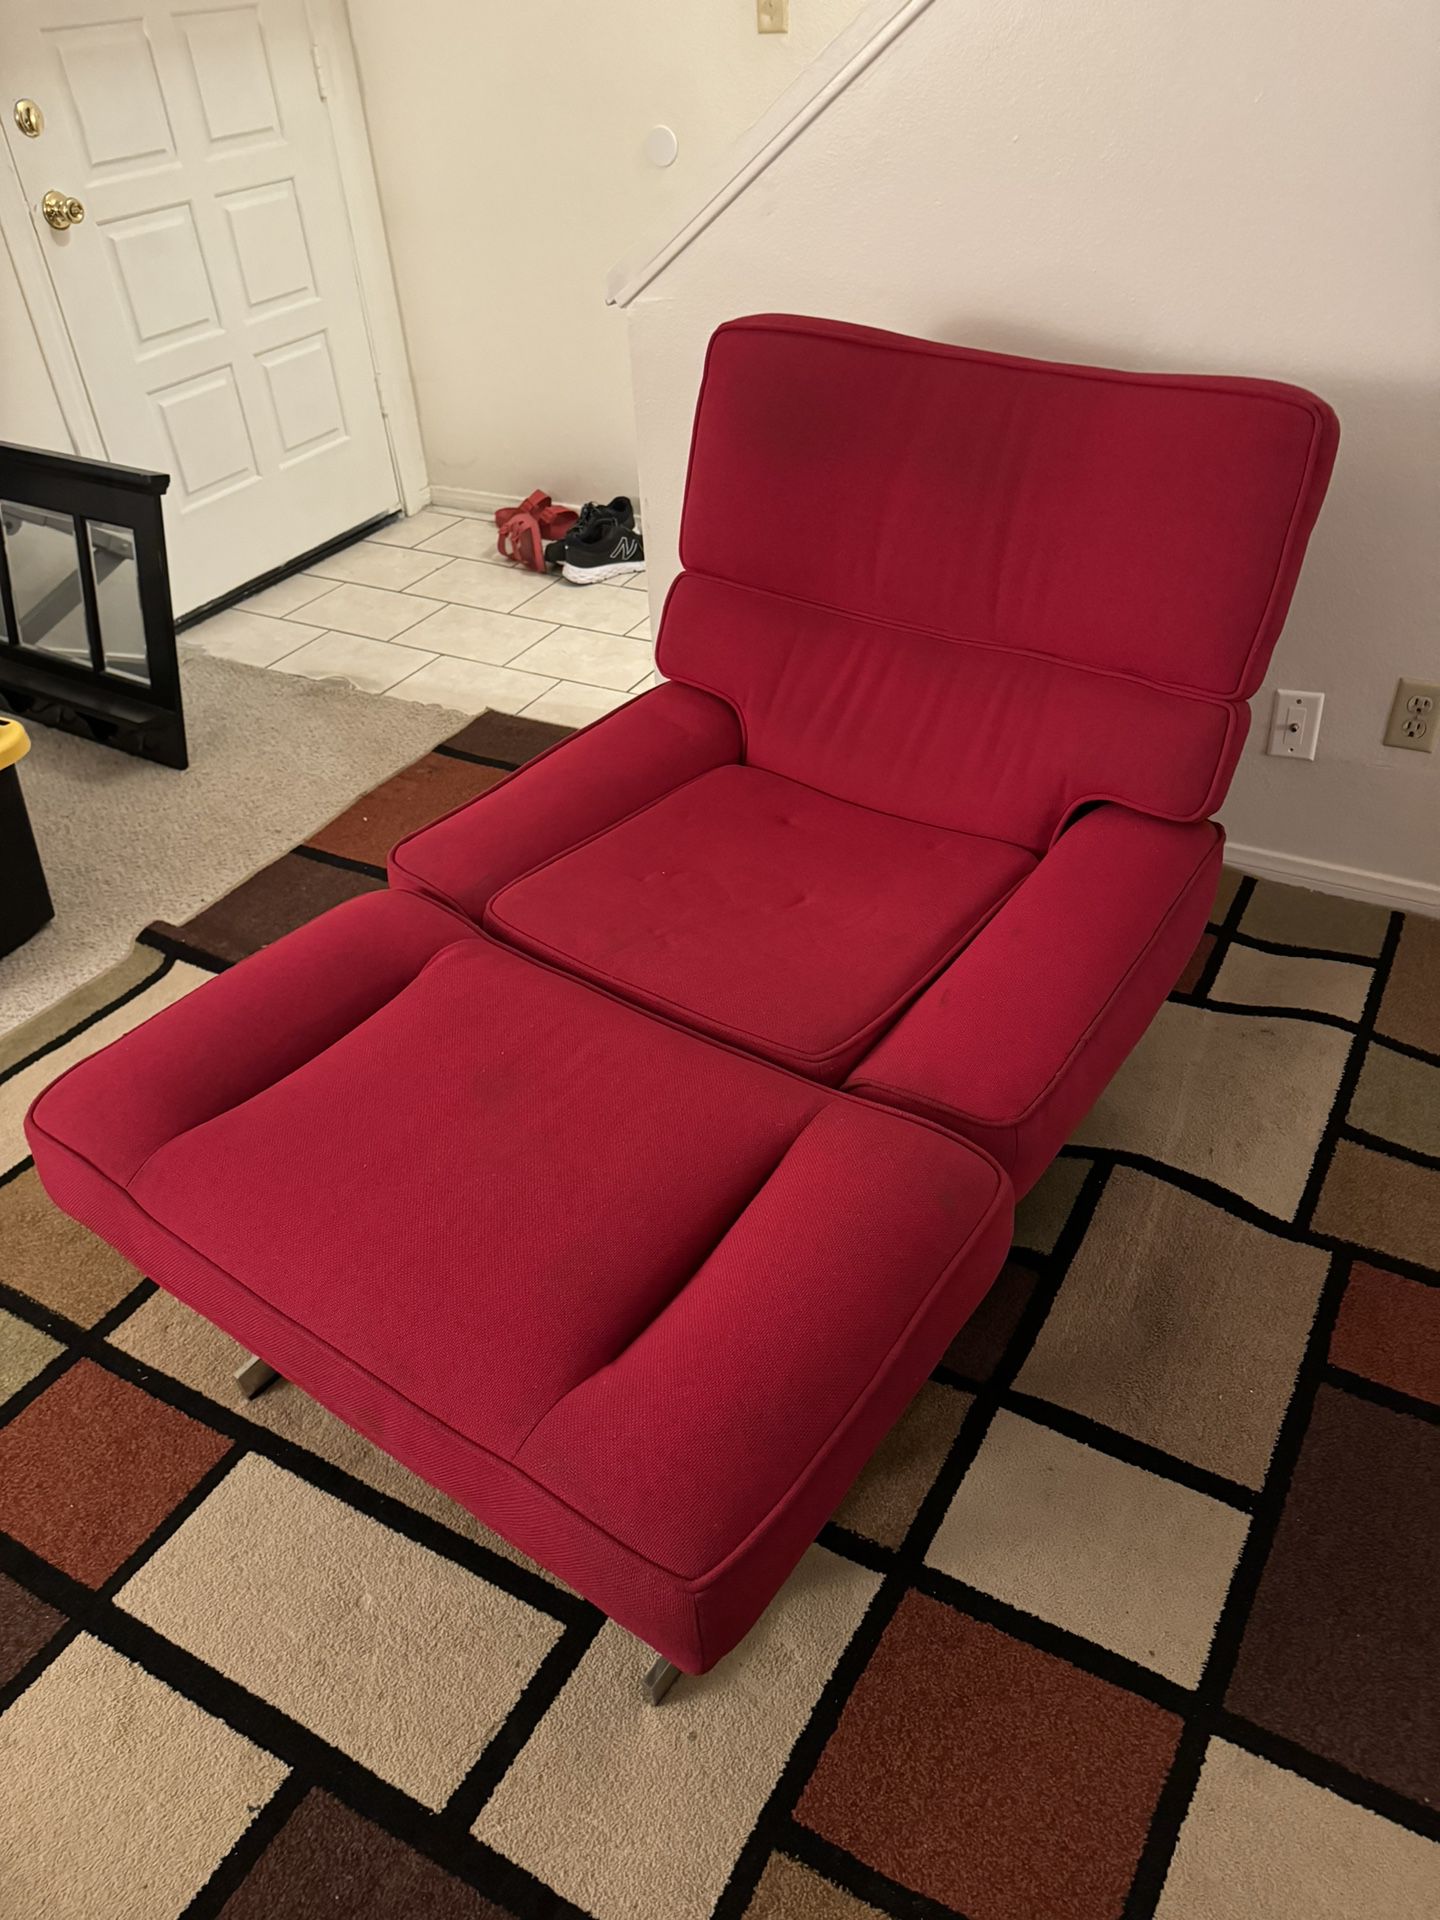 Retro Red Reclining Chair and Footstool